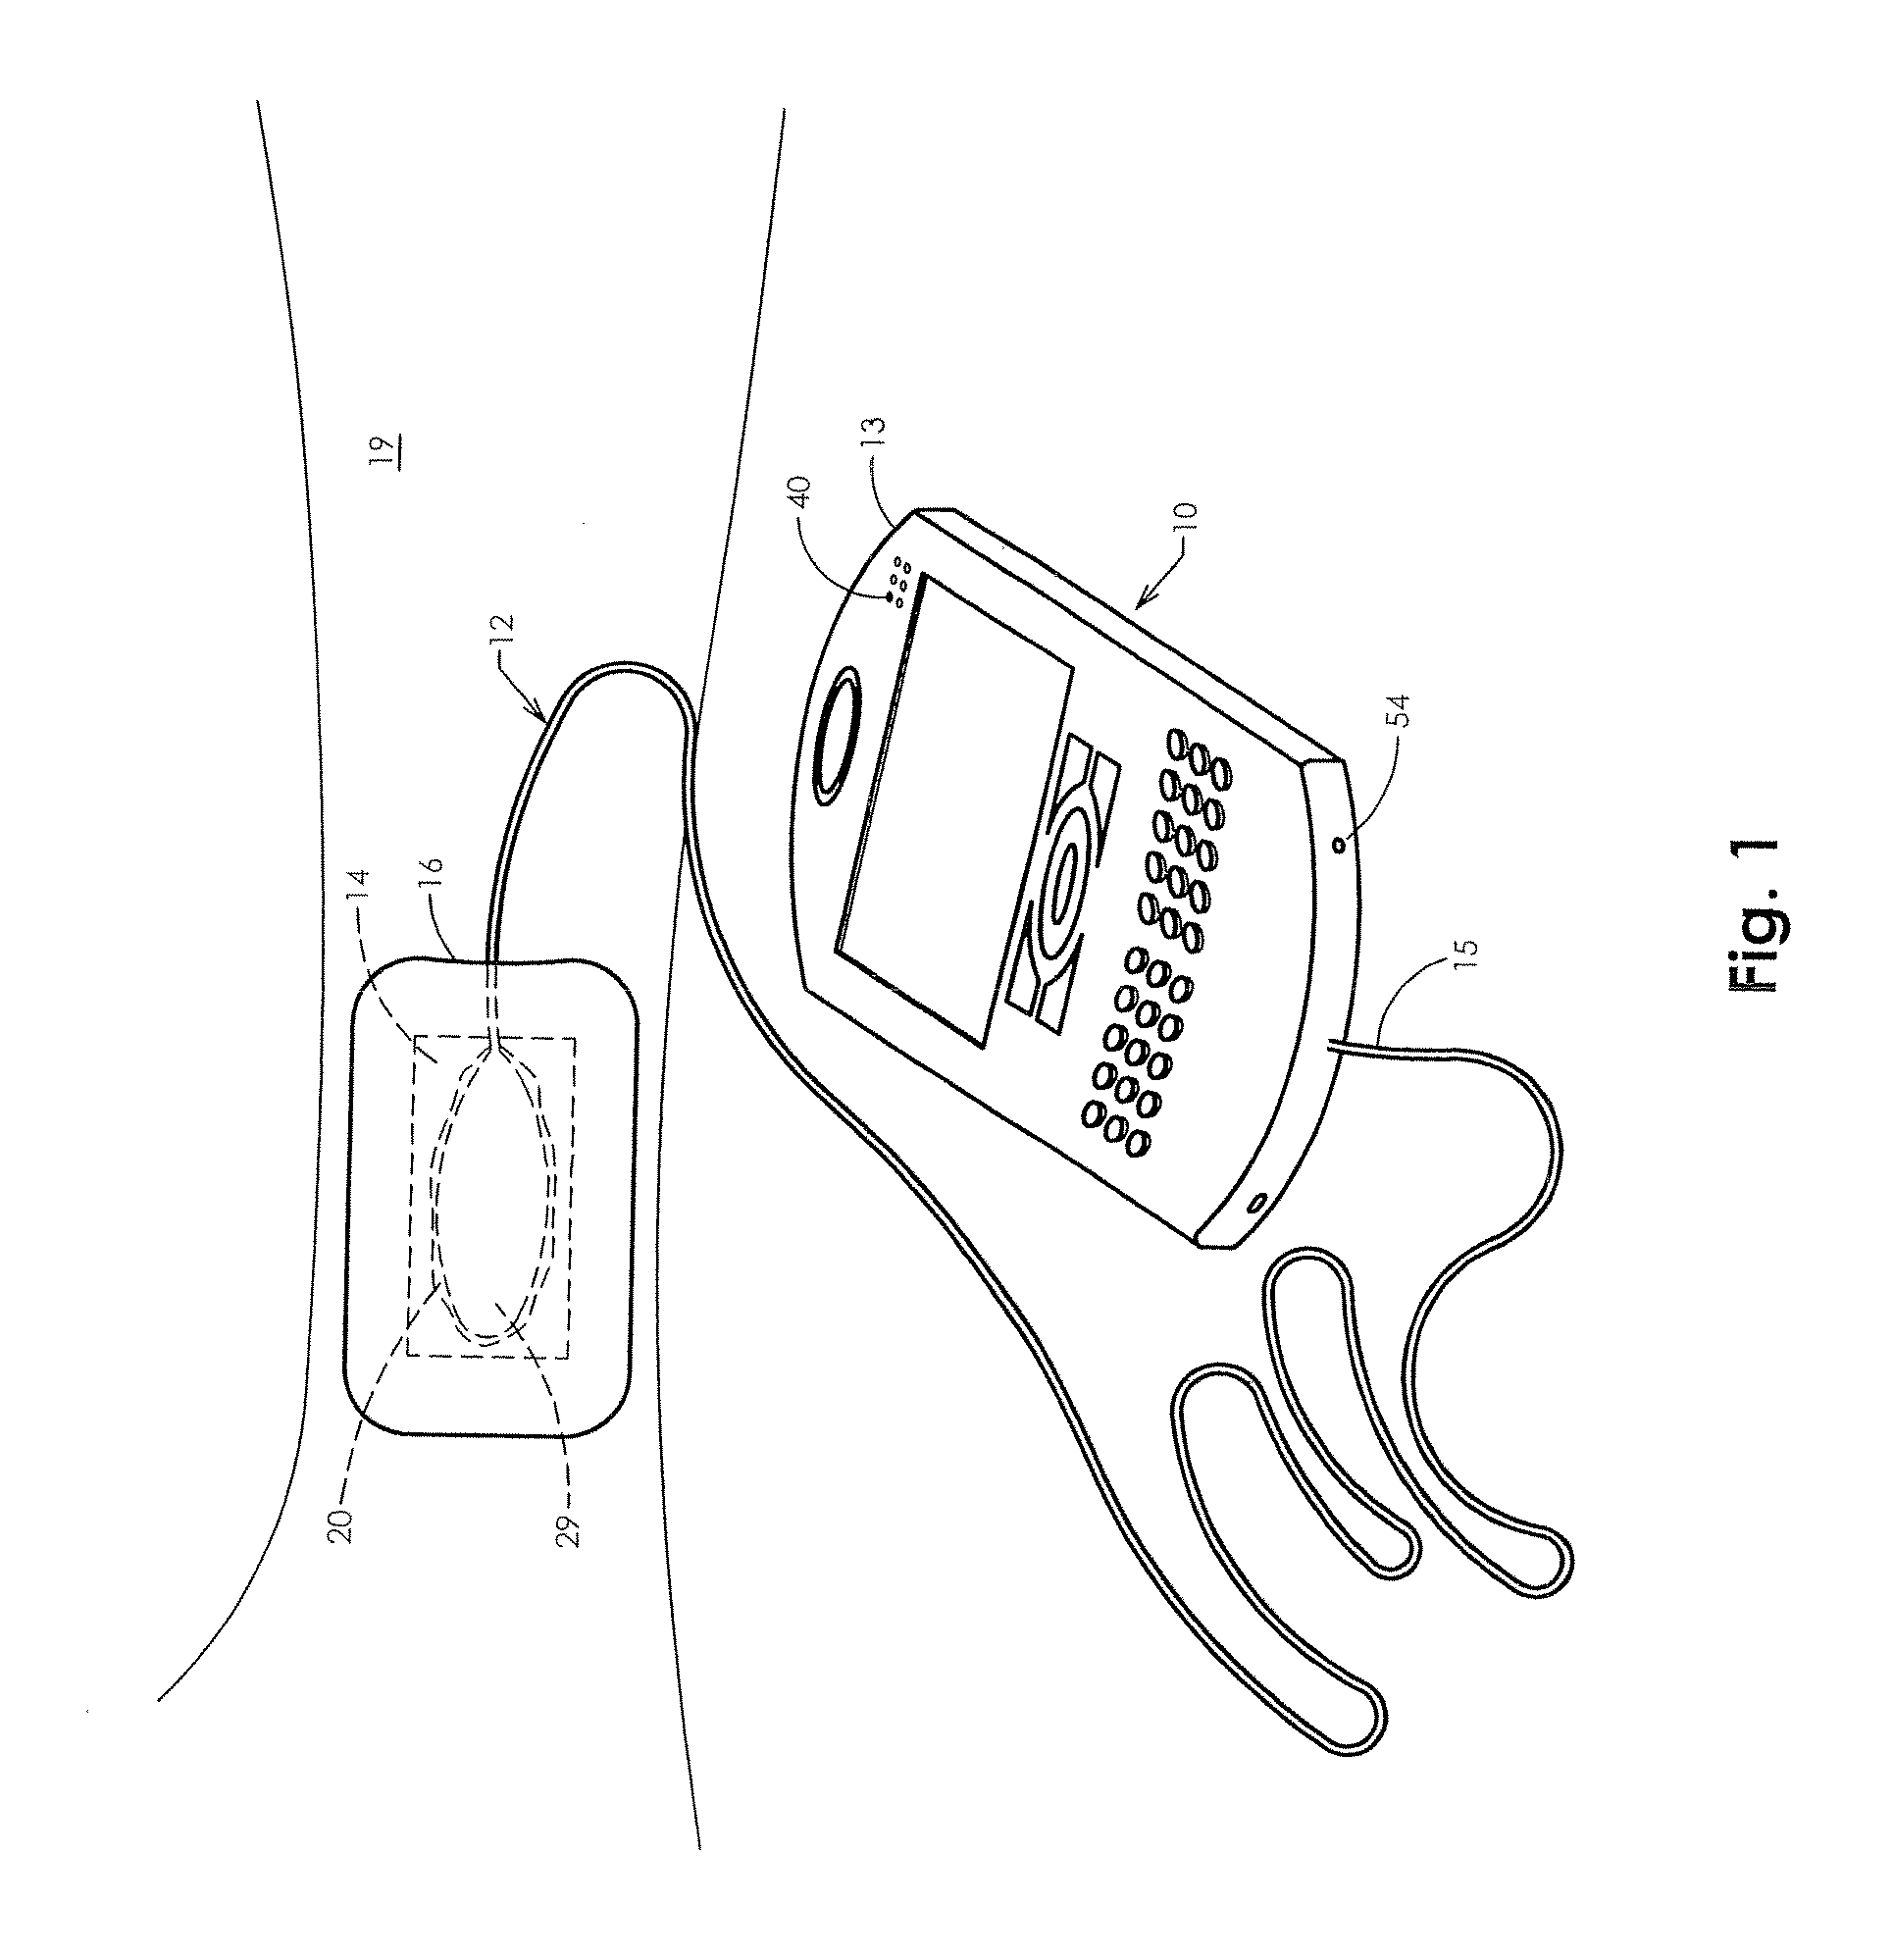 Apparatus and Methods for Controlling Tissue Oxygenation for Wound Healing and Promoting Tissue Viability